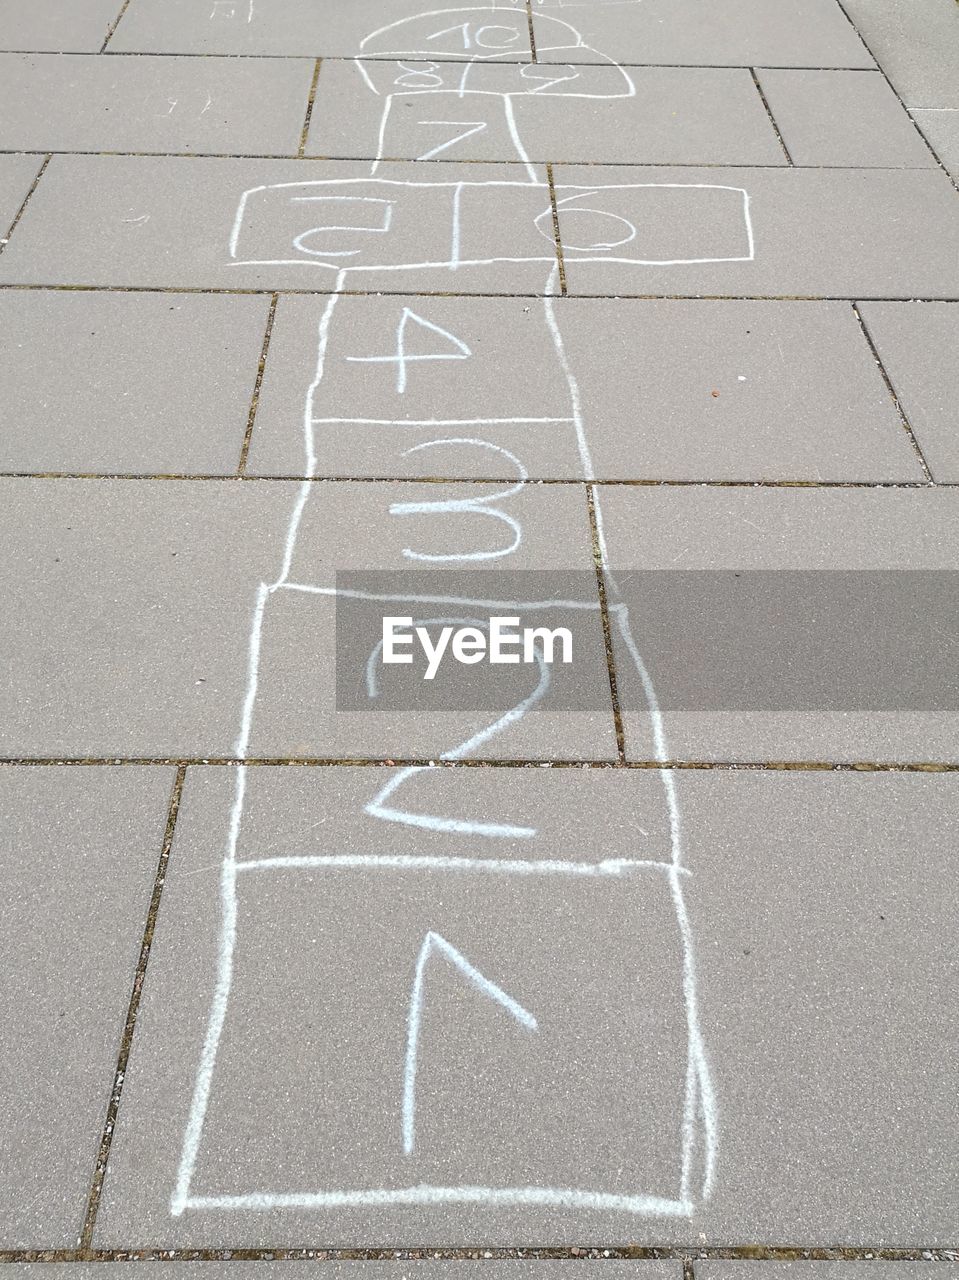 HIGH ANGLE VIEW OF TEXT ON WHITE FOOTPATH